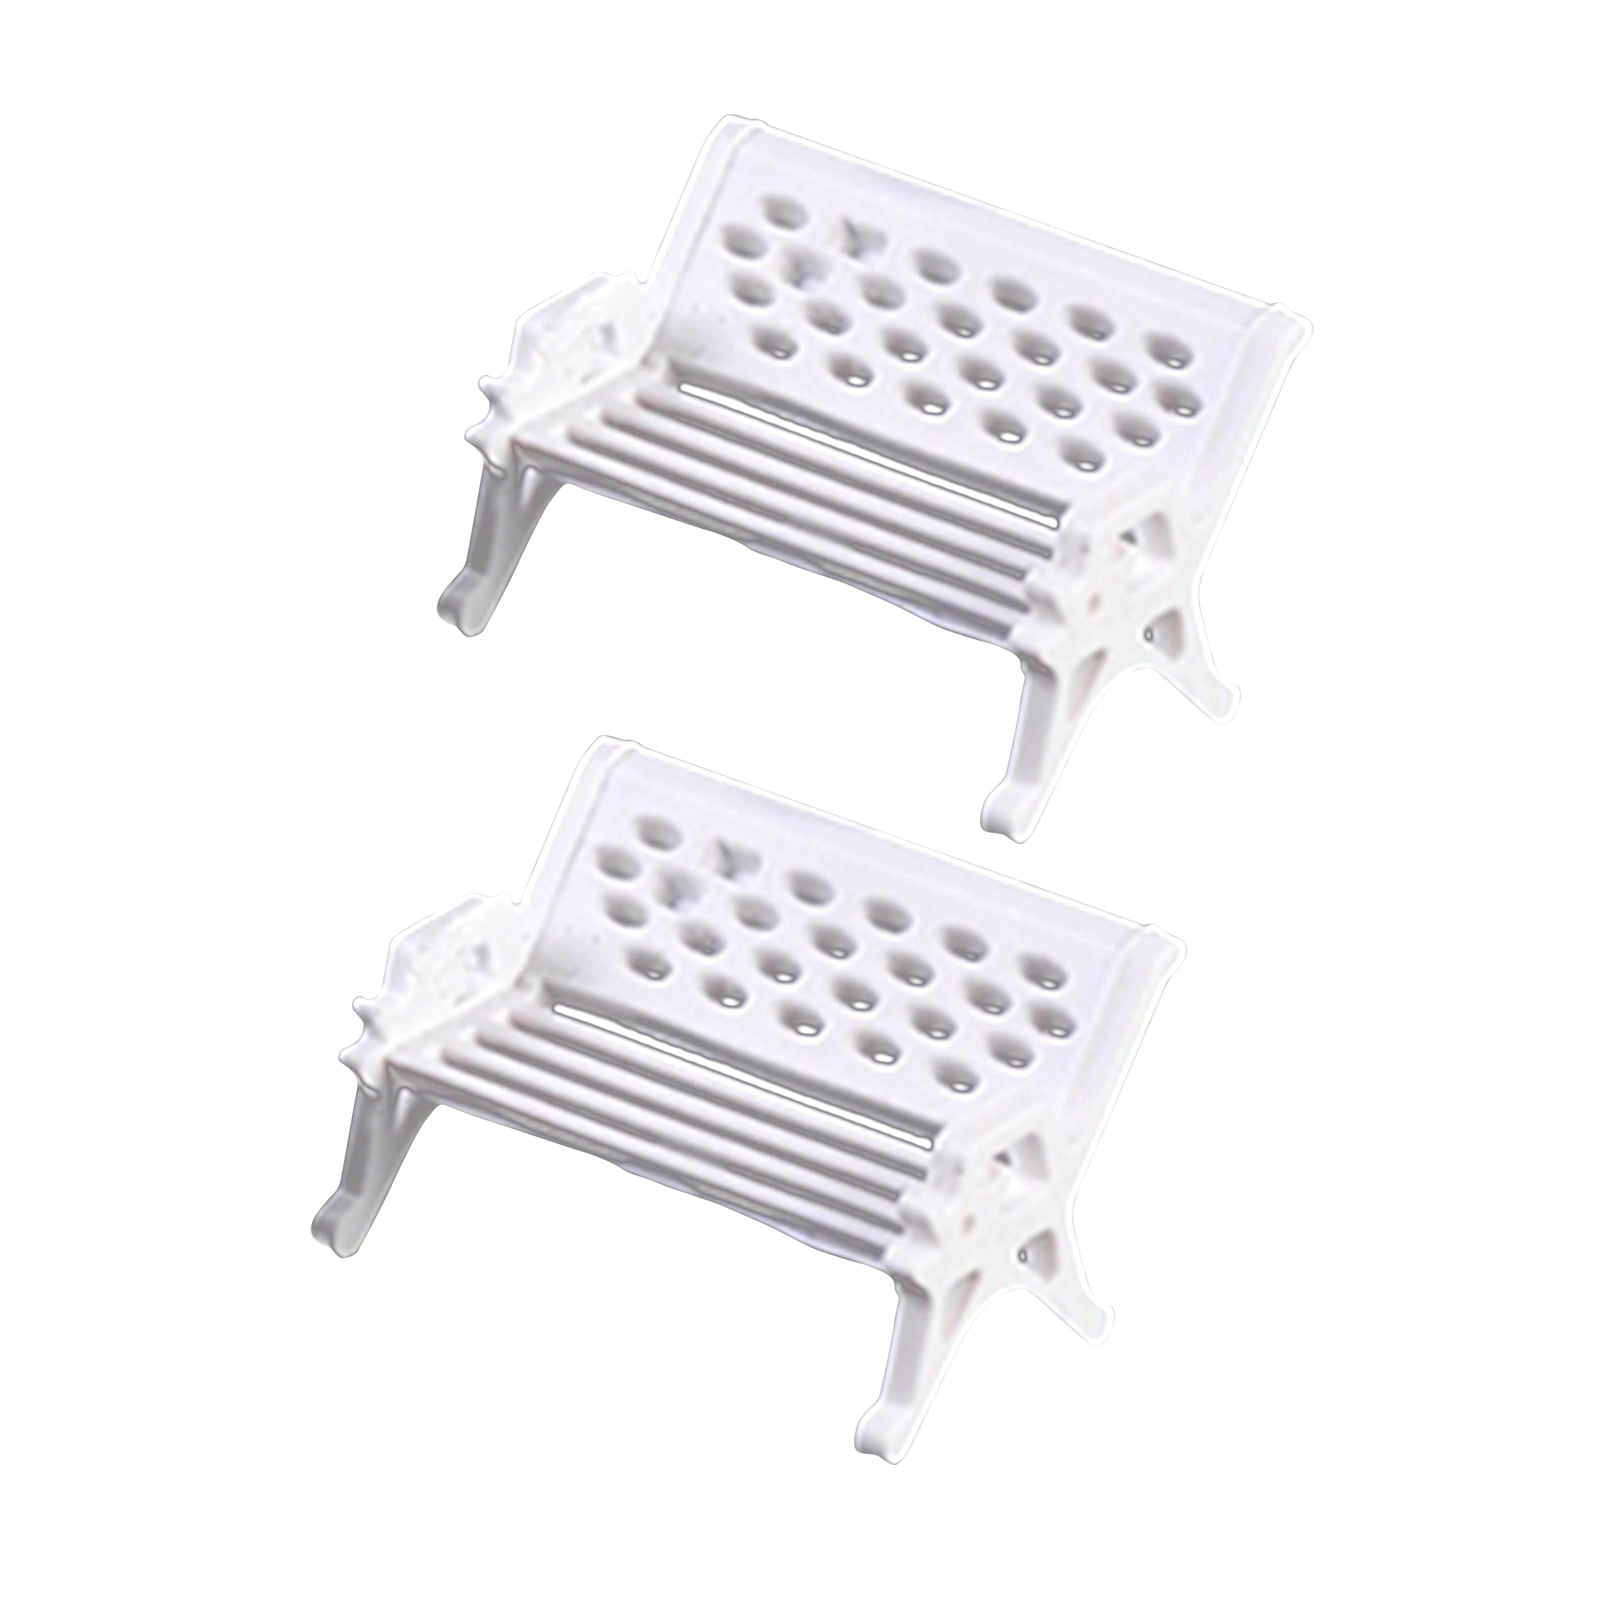 Pack of 2 Dollhouse Mini Park Bench Wooden Miniature Furniture Bench Chair for DIY Craft Home Fairy Dollhouse Garden Decoration Whit Dedoot Miniature Bench Ornament 